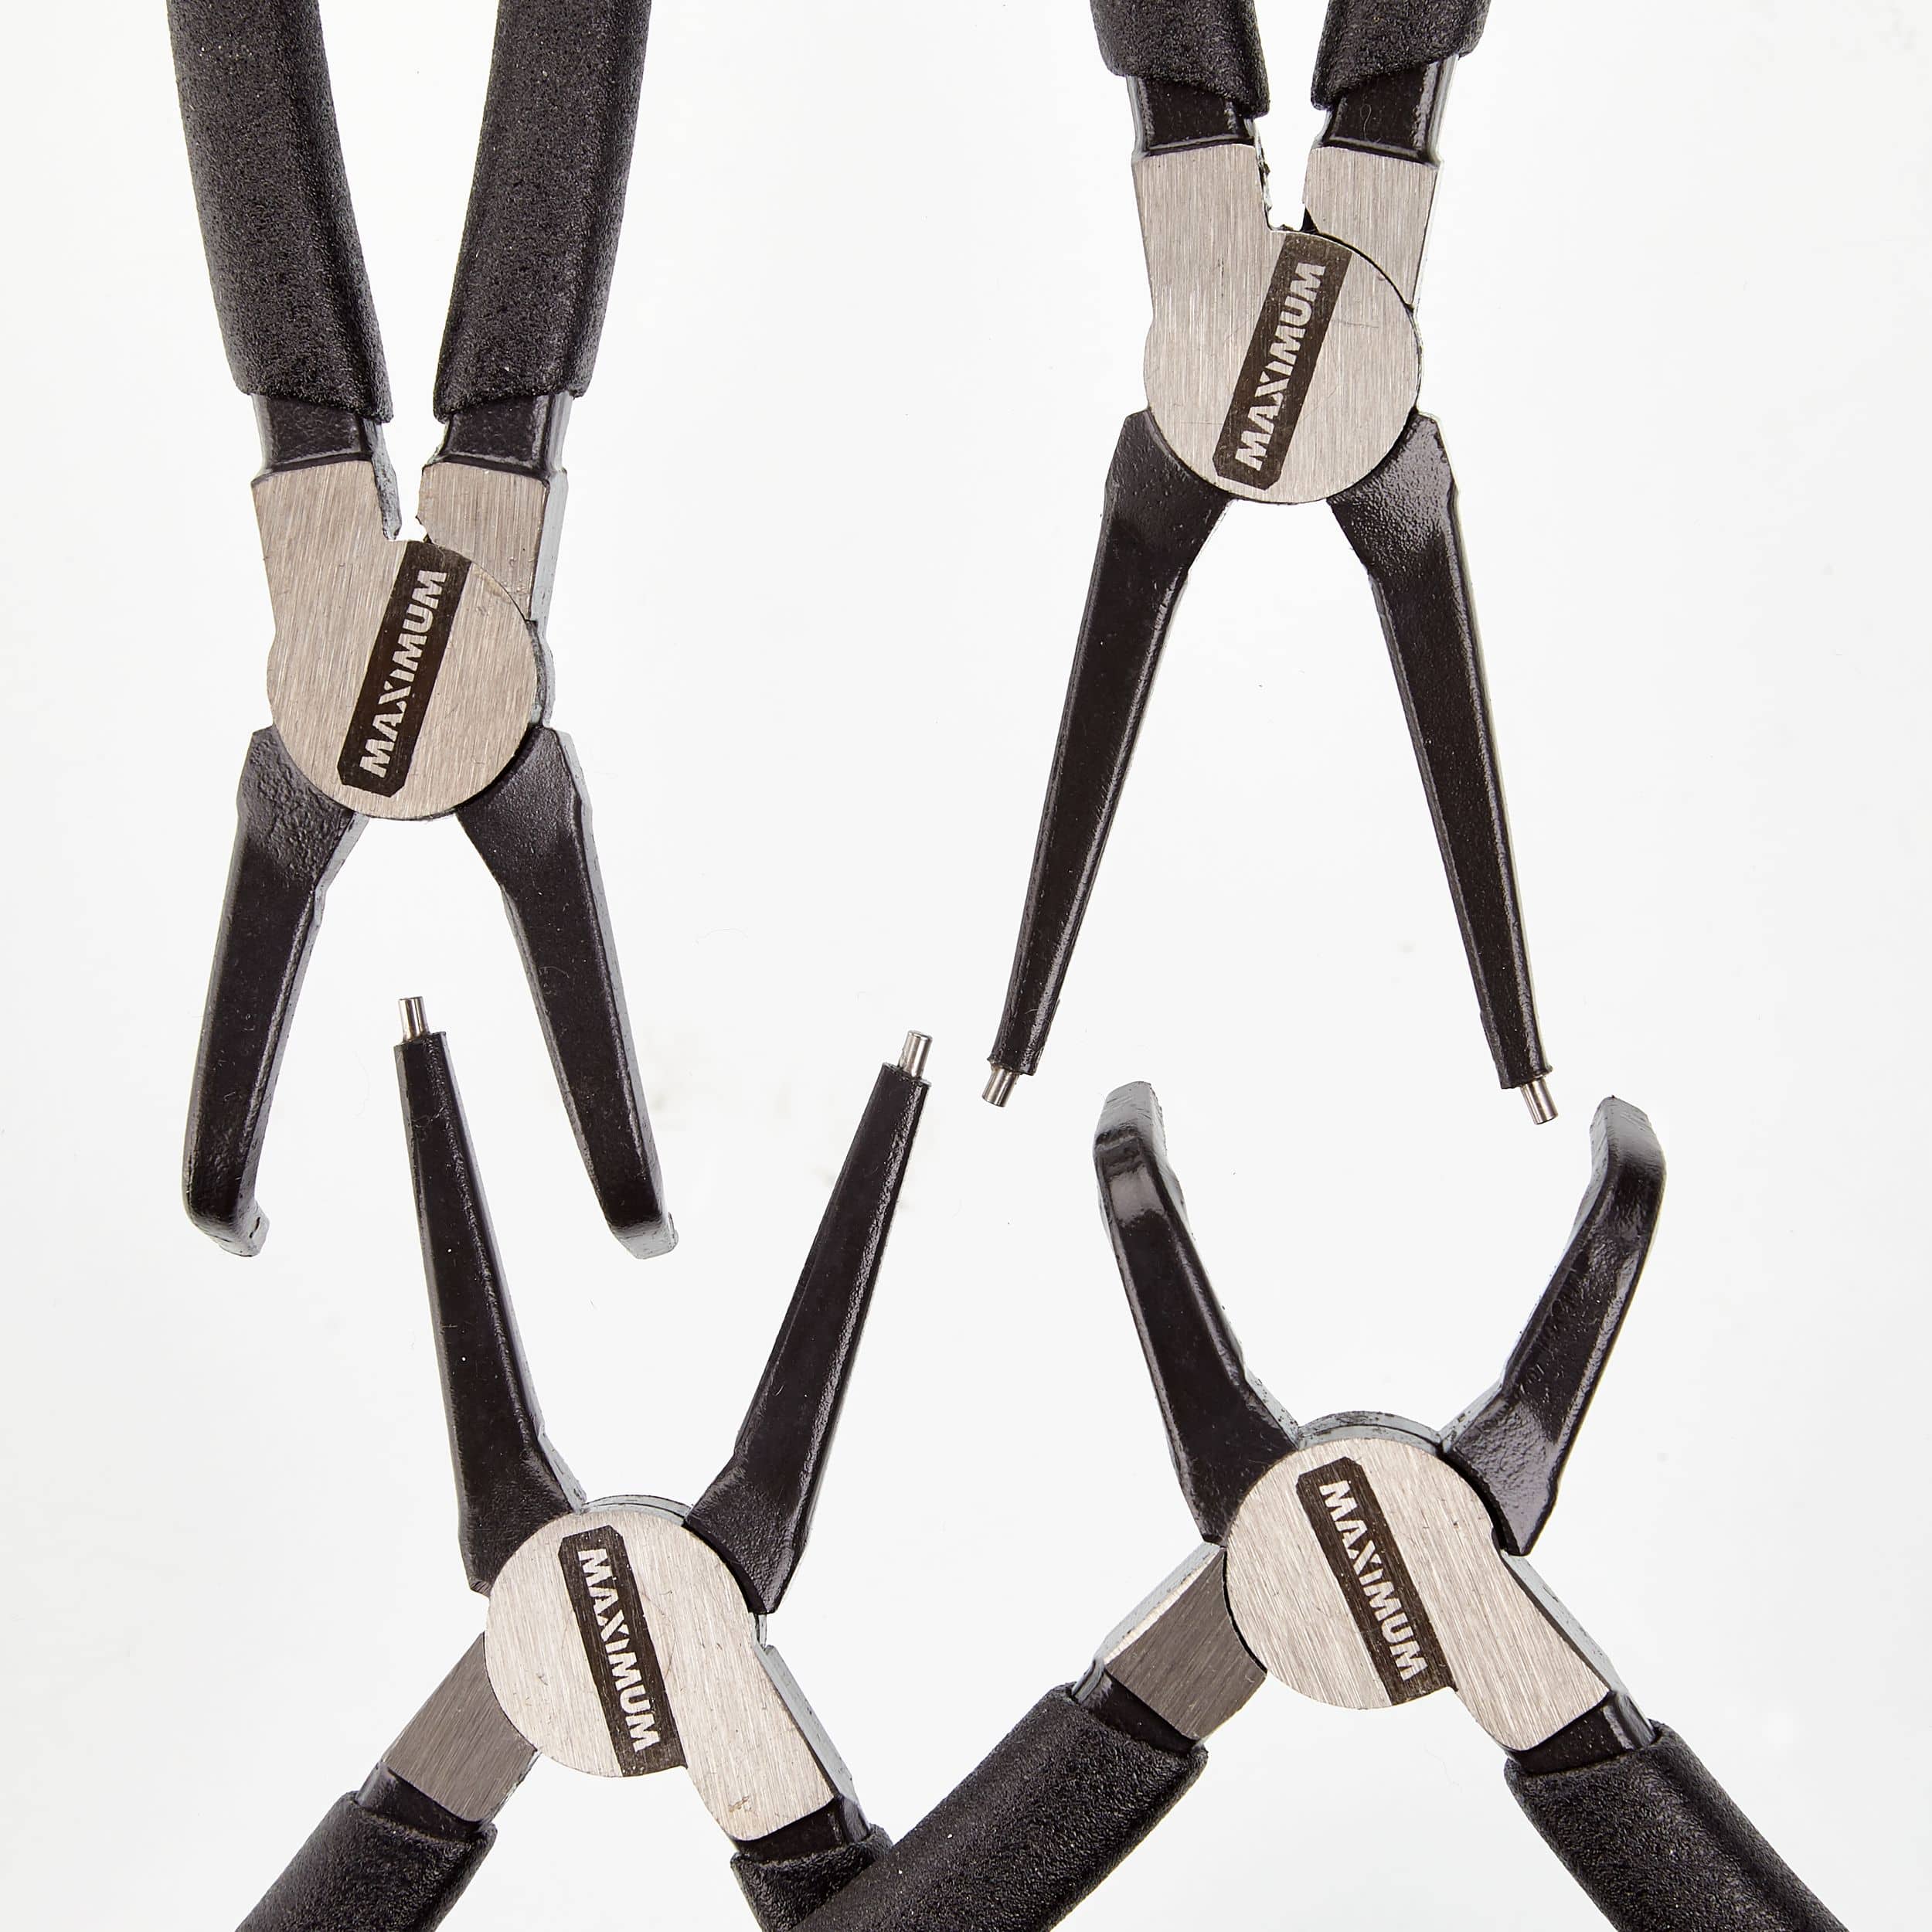 MAXIMUM Snap Ring Pliers Set, High-Quality Forged Tool Steel, Soft